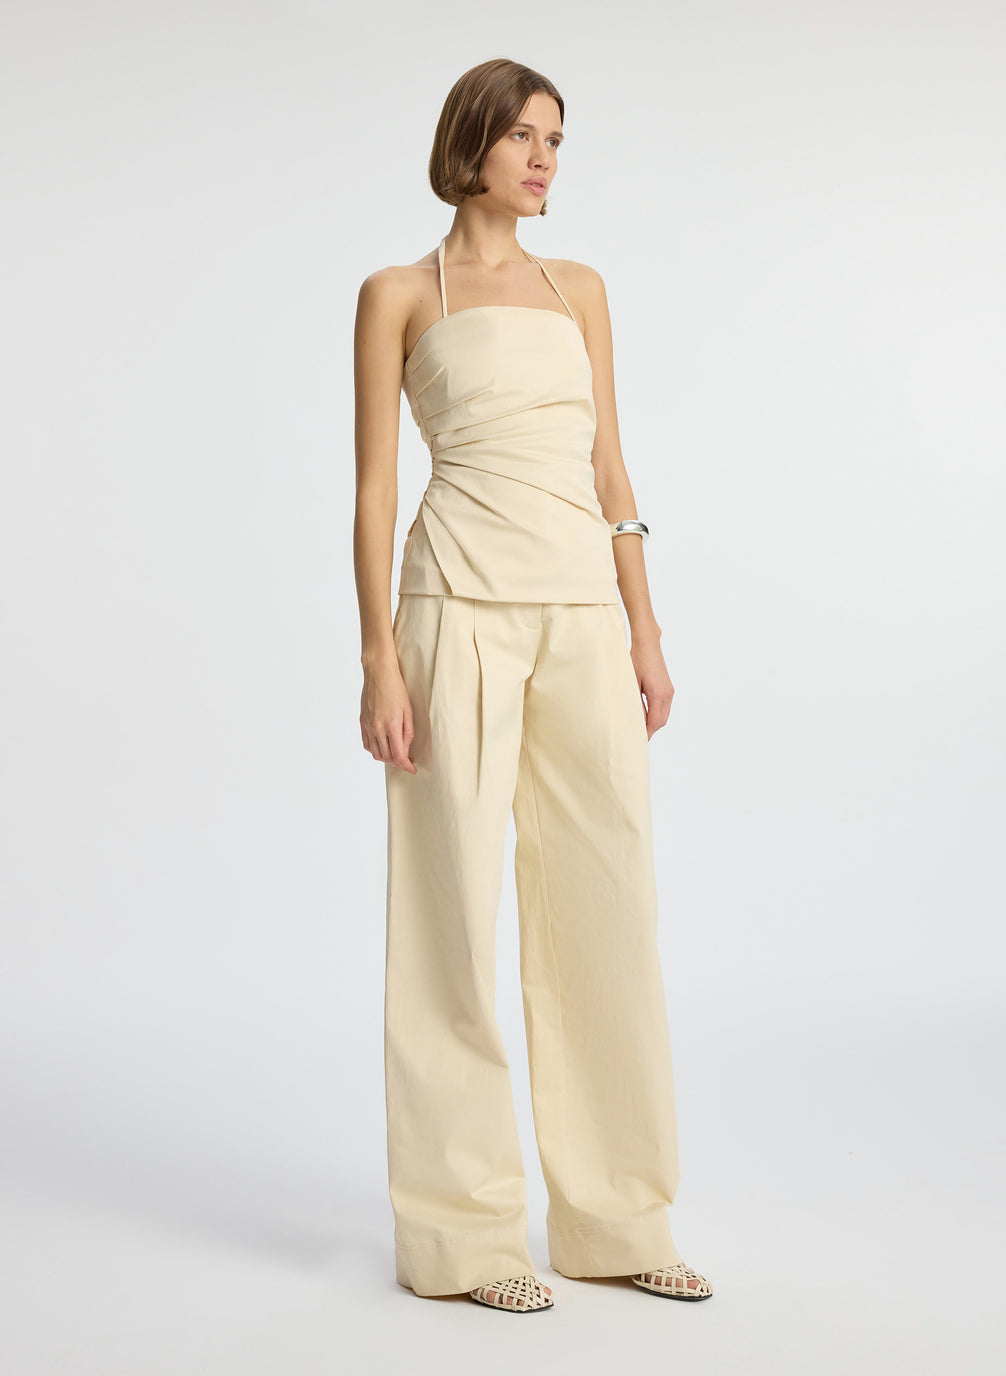 side  view of woman wearing beige halter top with side ruching and beige wide leg pant